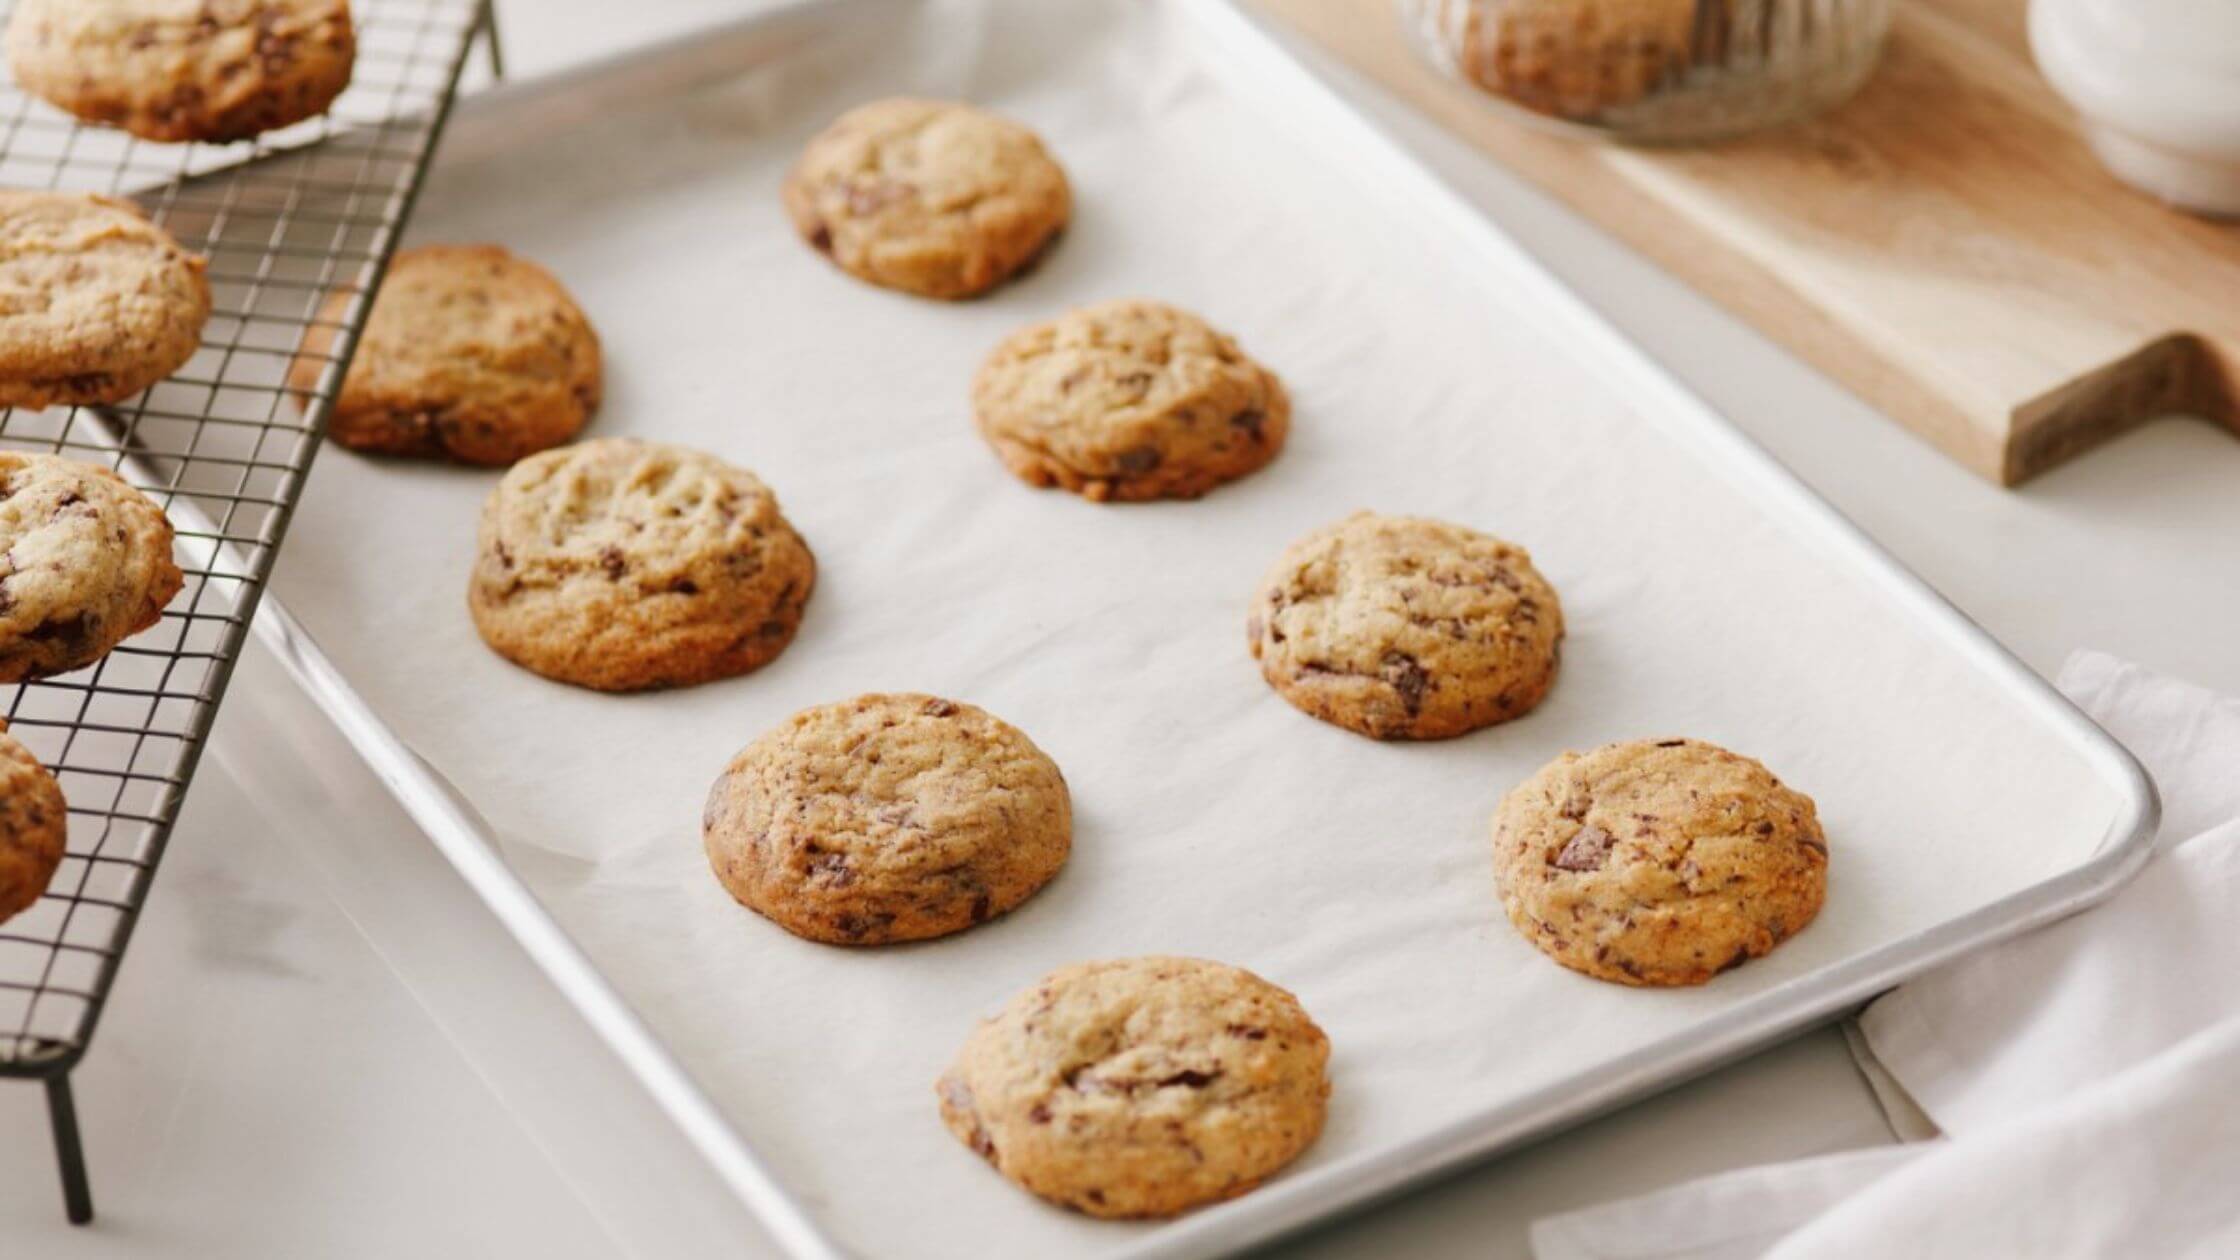 Get A Boost From Banana Peel Flour In Your Cookies